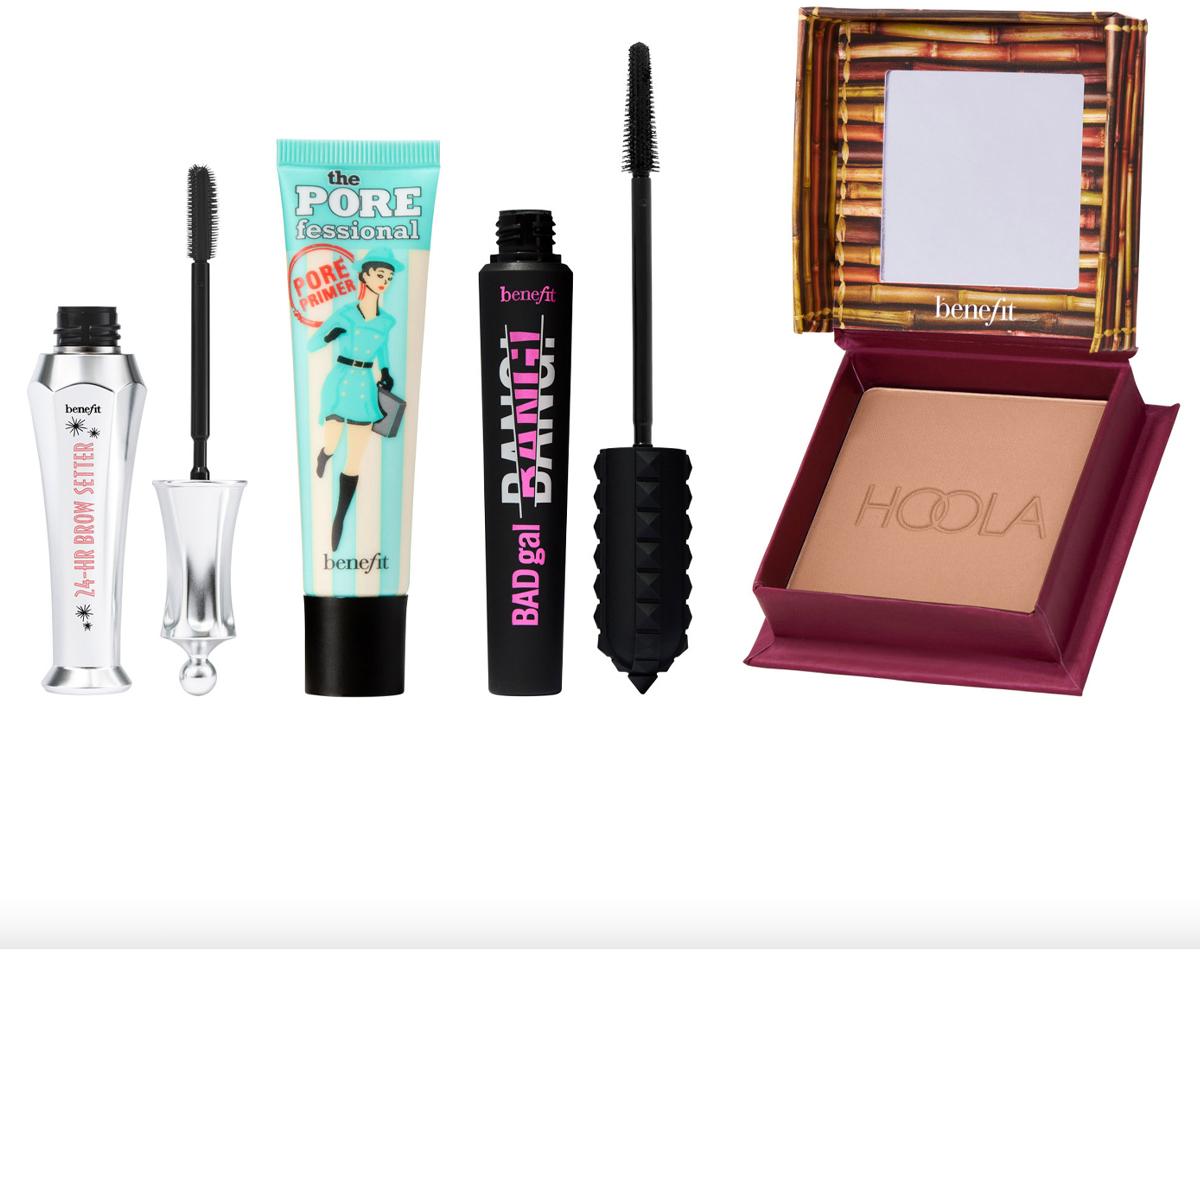 JCPenney - Hurry! Weekly Wow steals from Stila, Make Up For Ever, Benefit  Cosmetics, and more are $15 or less, while supplies last—and that won't be  for long!